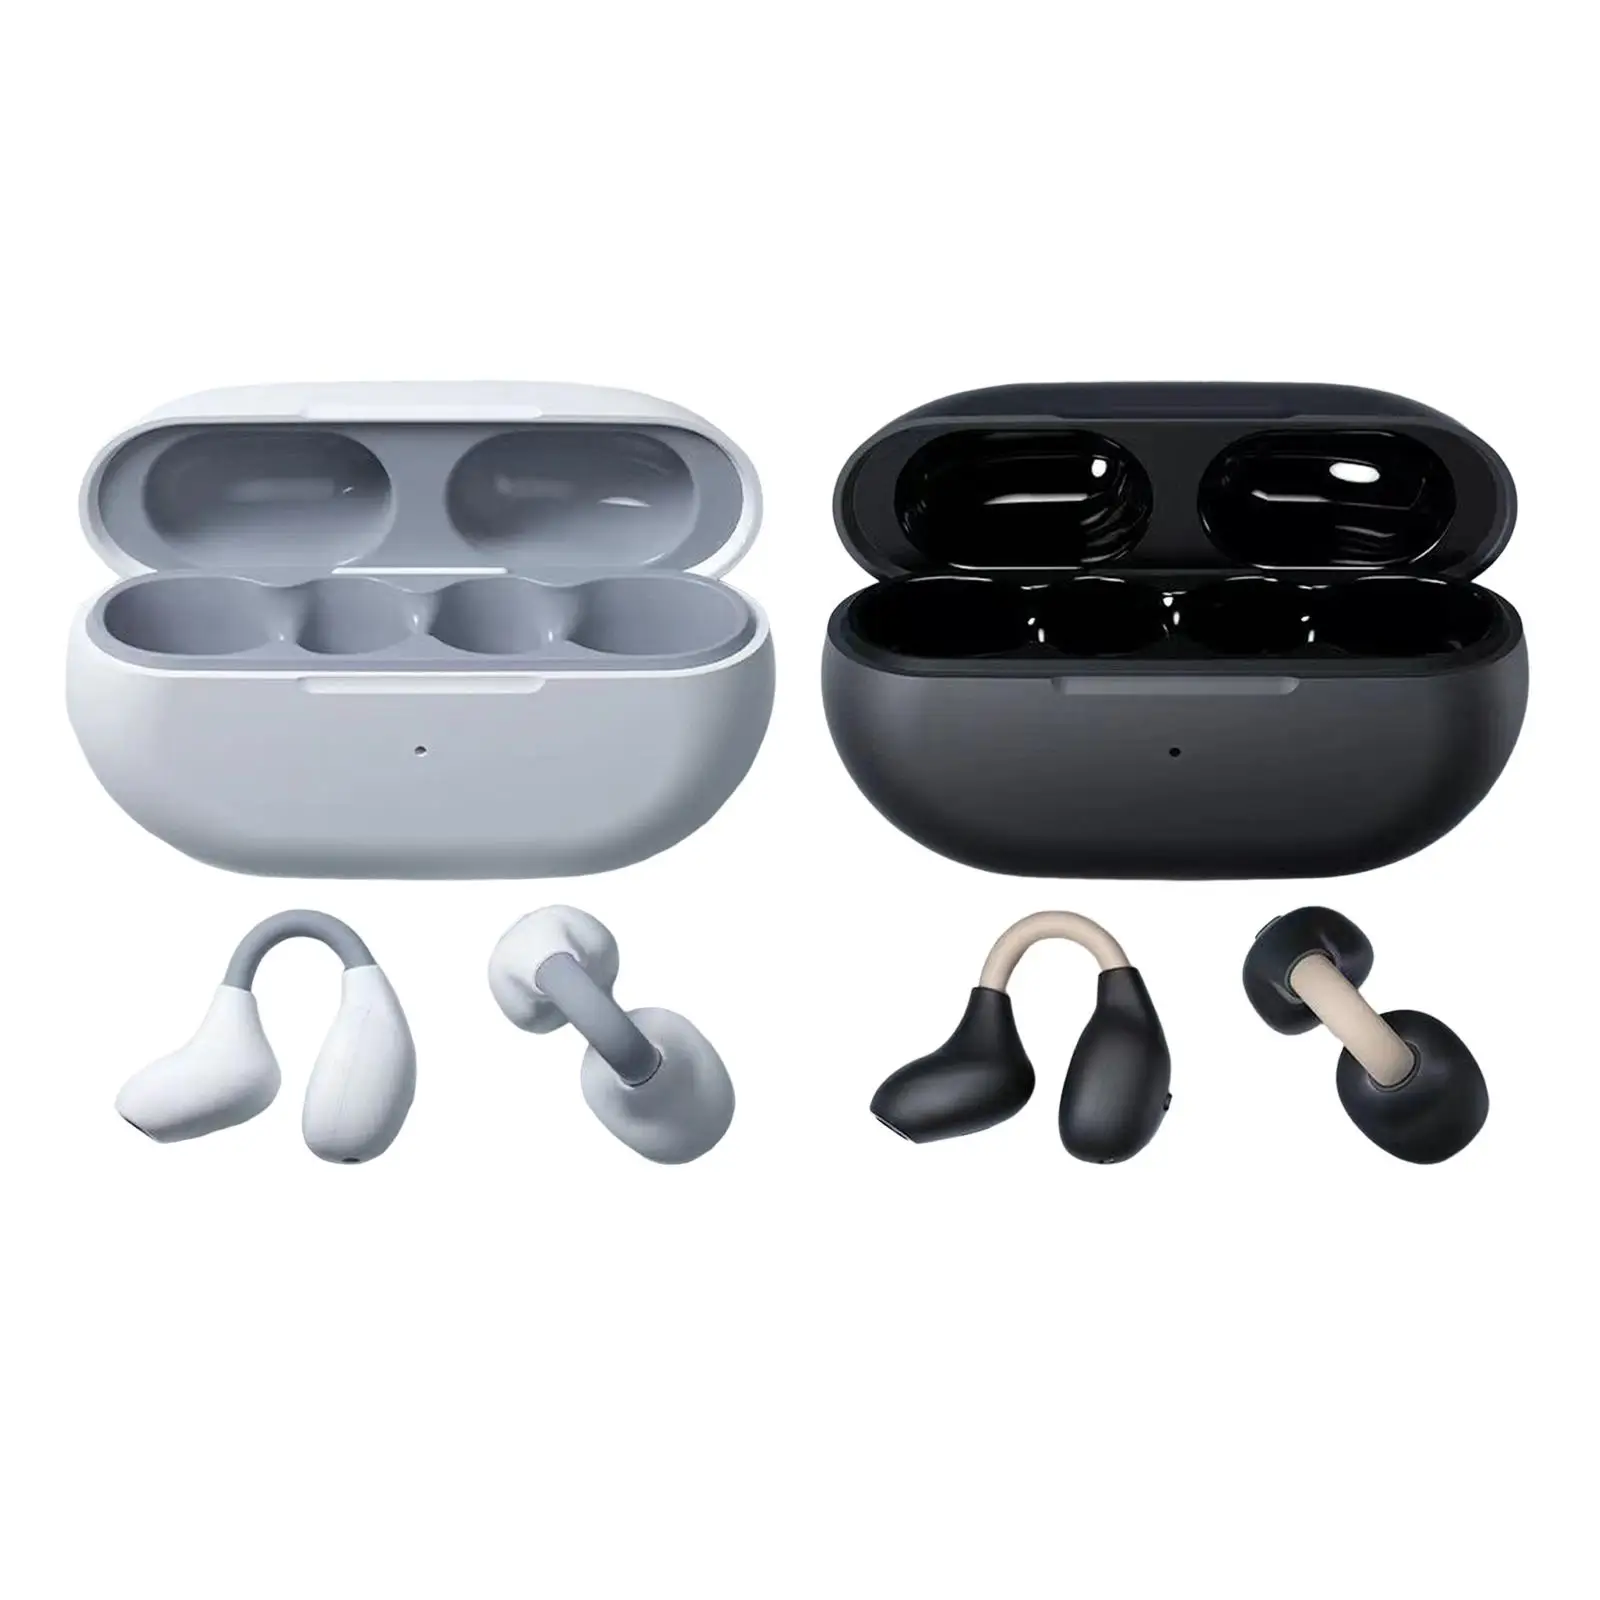 Ear Clip Wireless Earbuds HiFi Sound Headset Low Latency Clip On Headphones for Office